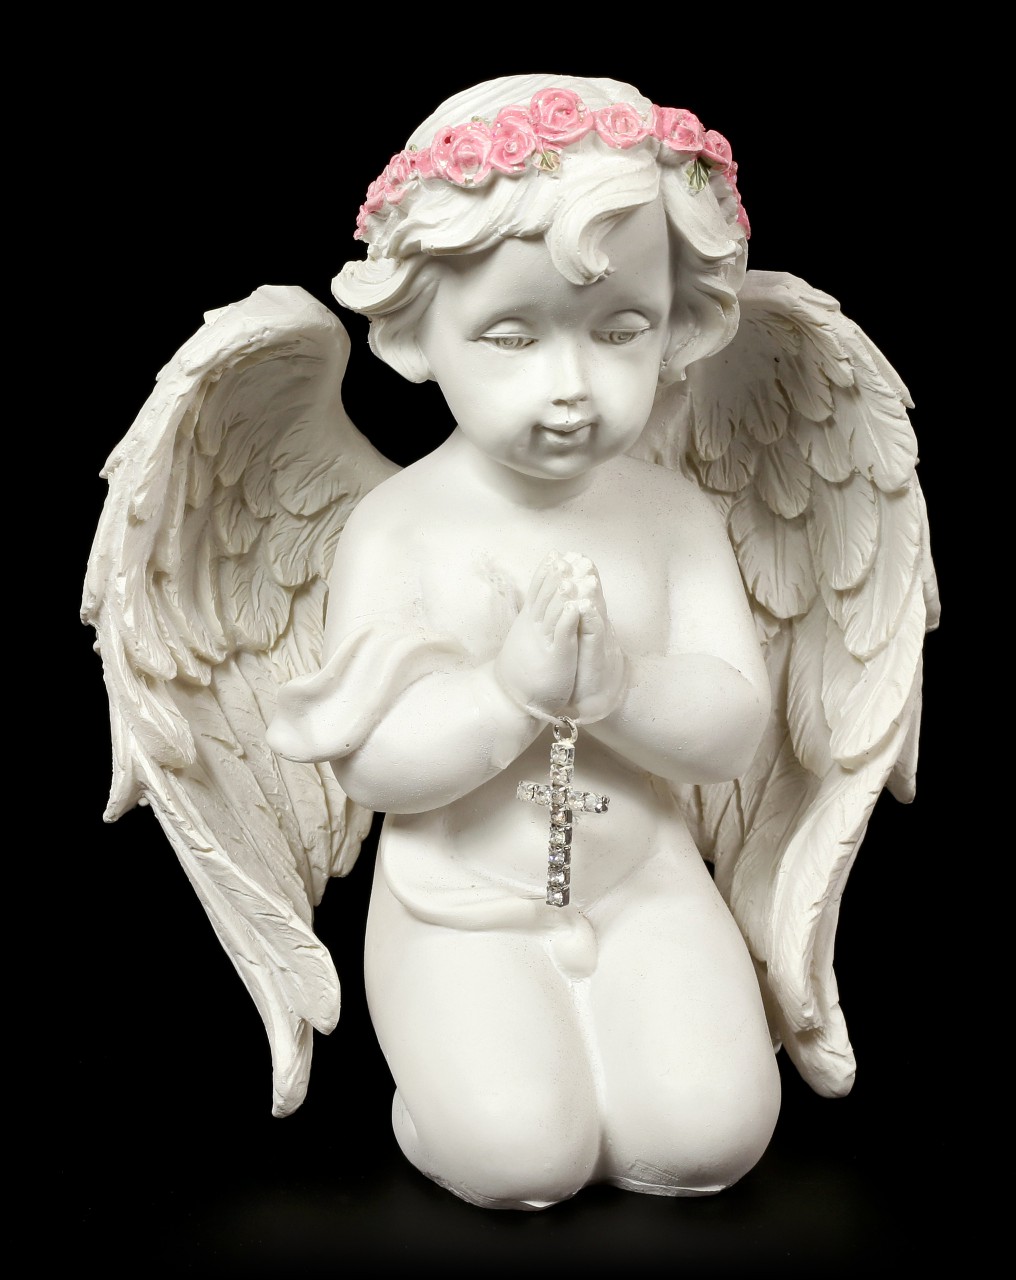 Angel Figurine - Praying with Cross in his Hands